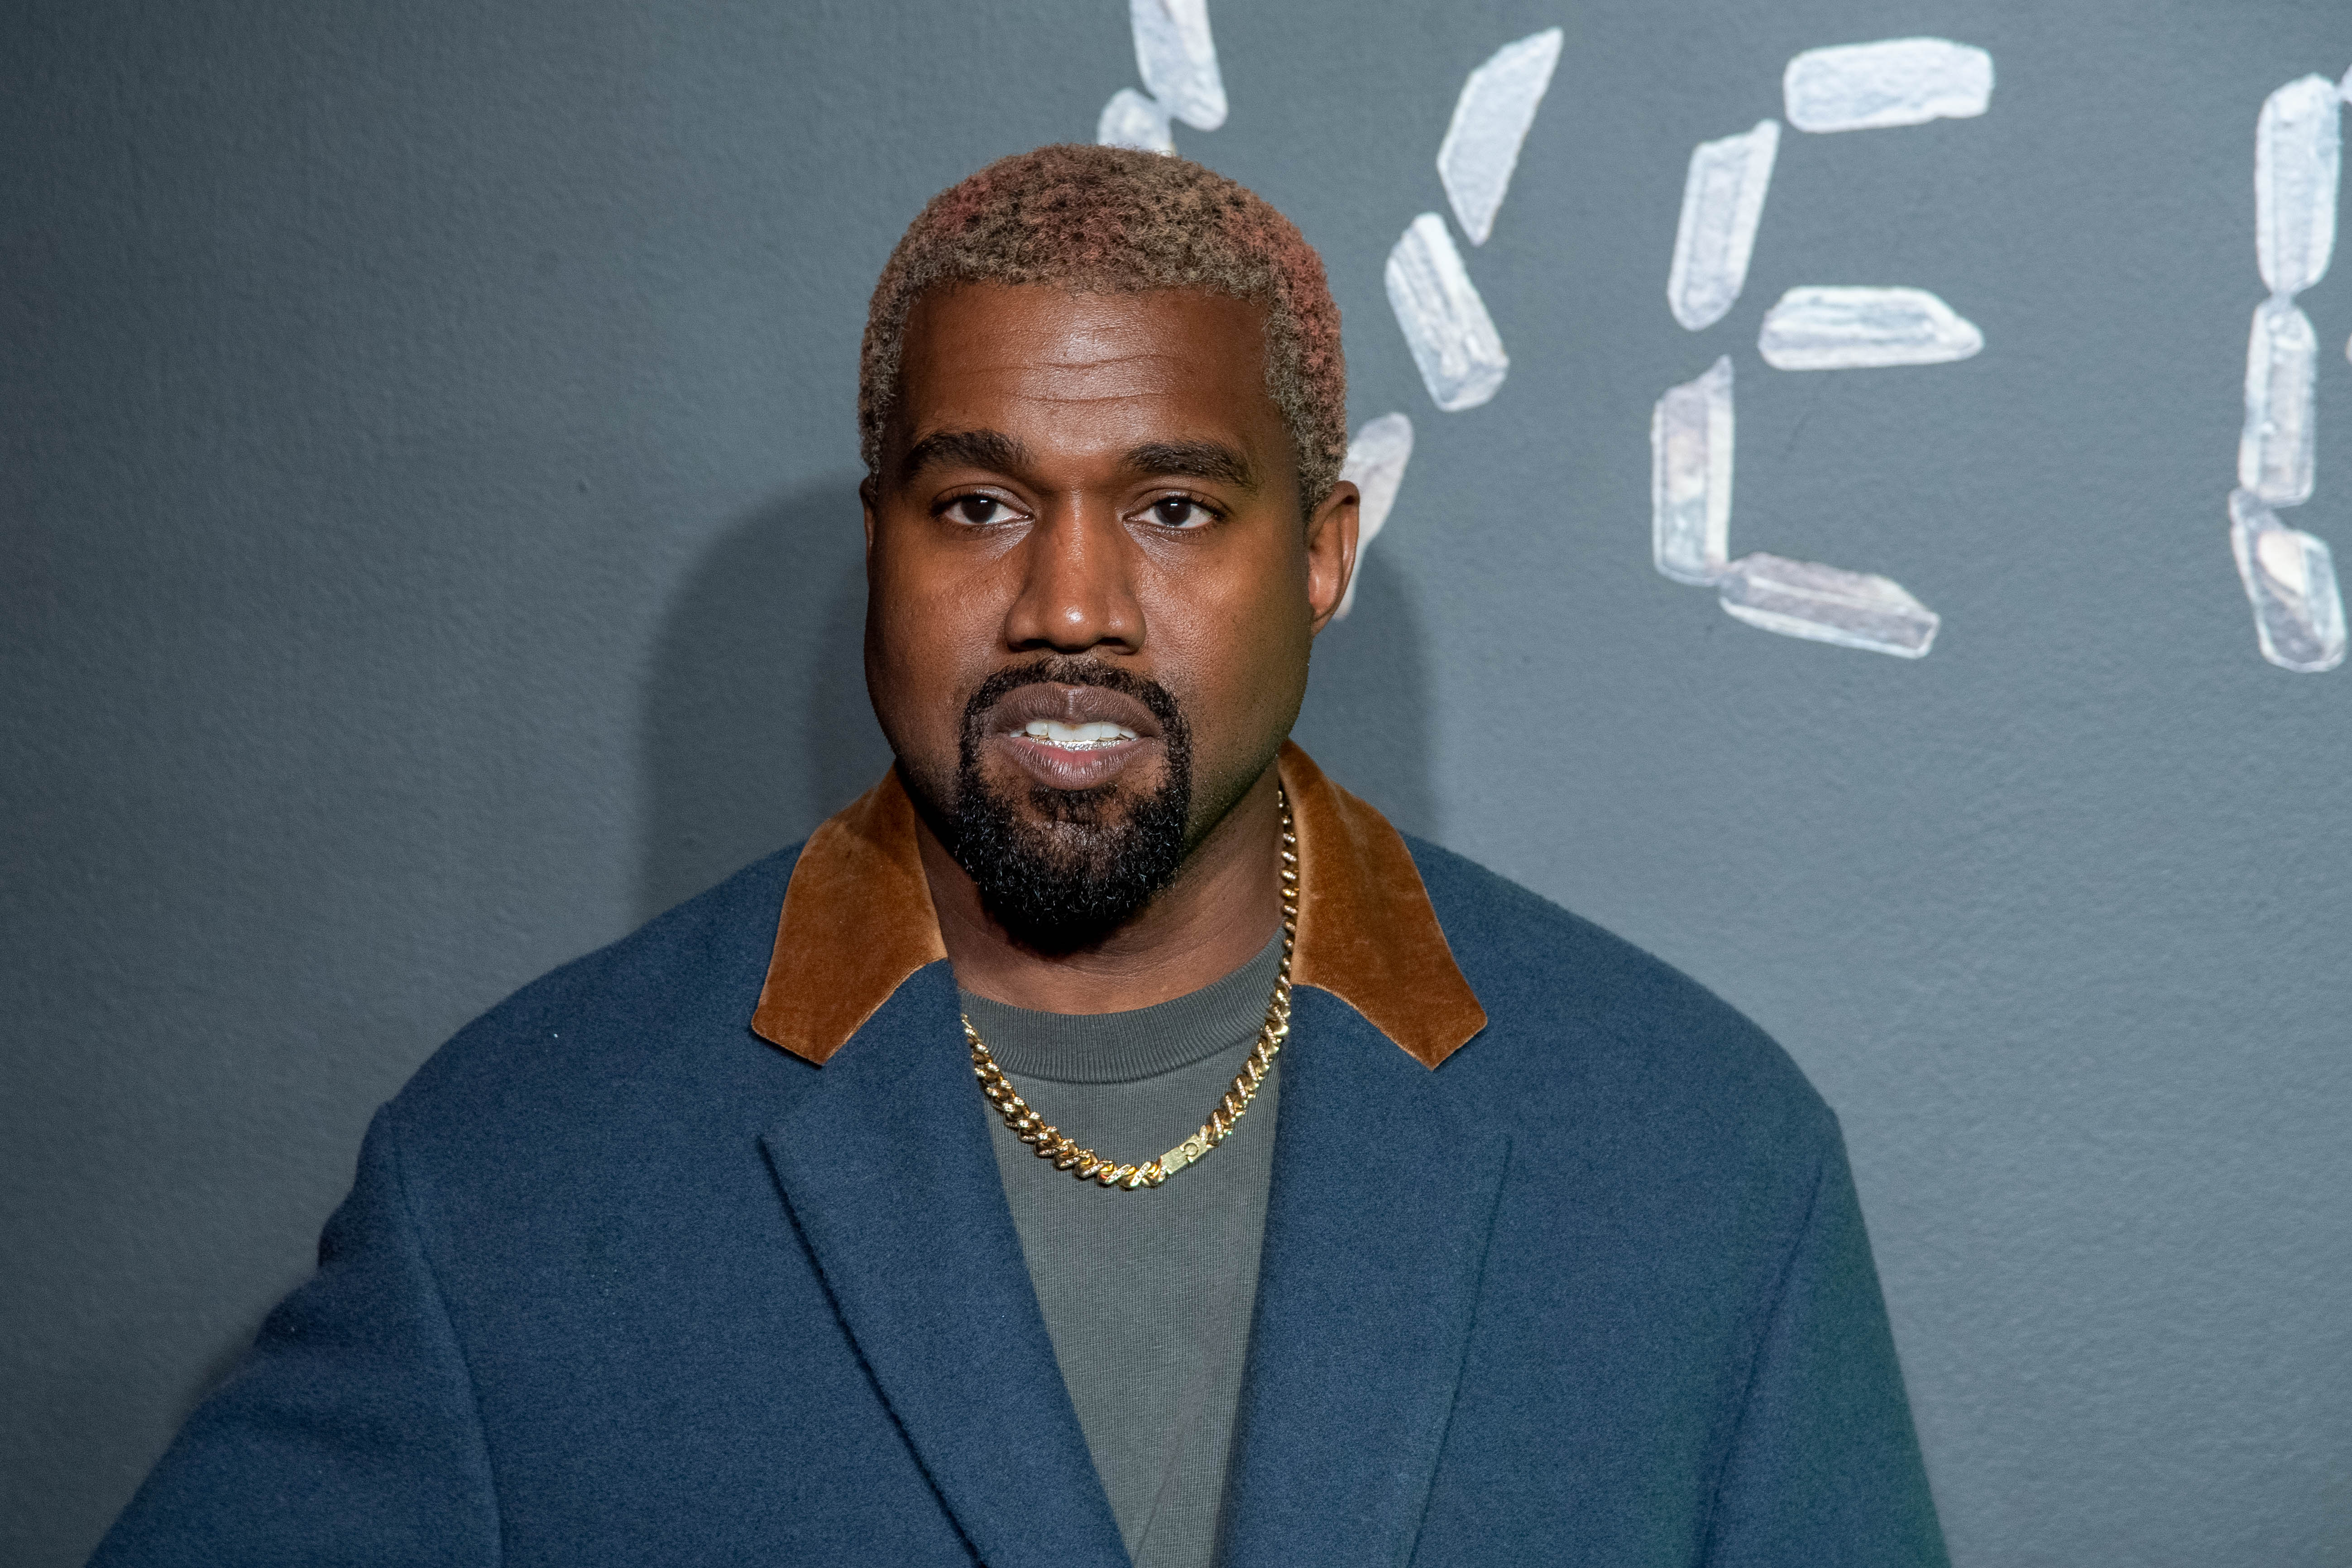  Kanye West attends the Versace fall 2019 fashion show, 2018, New York City. | Photo: Getty Images